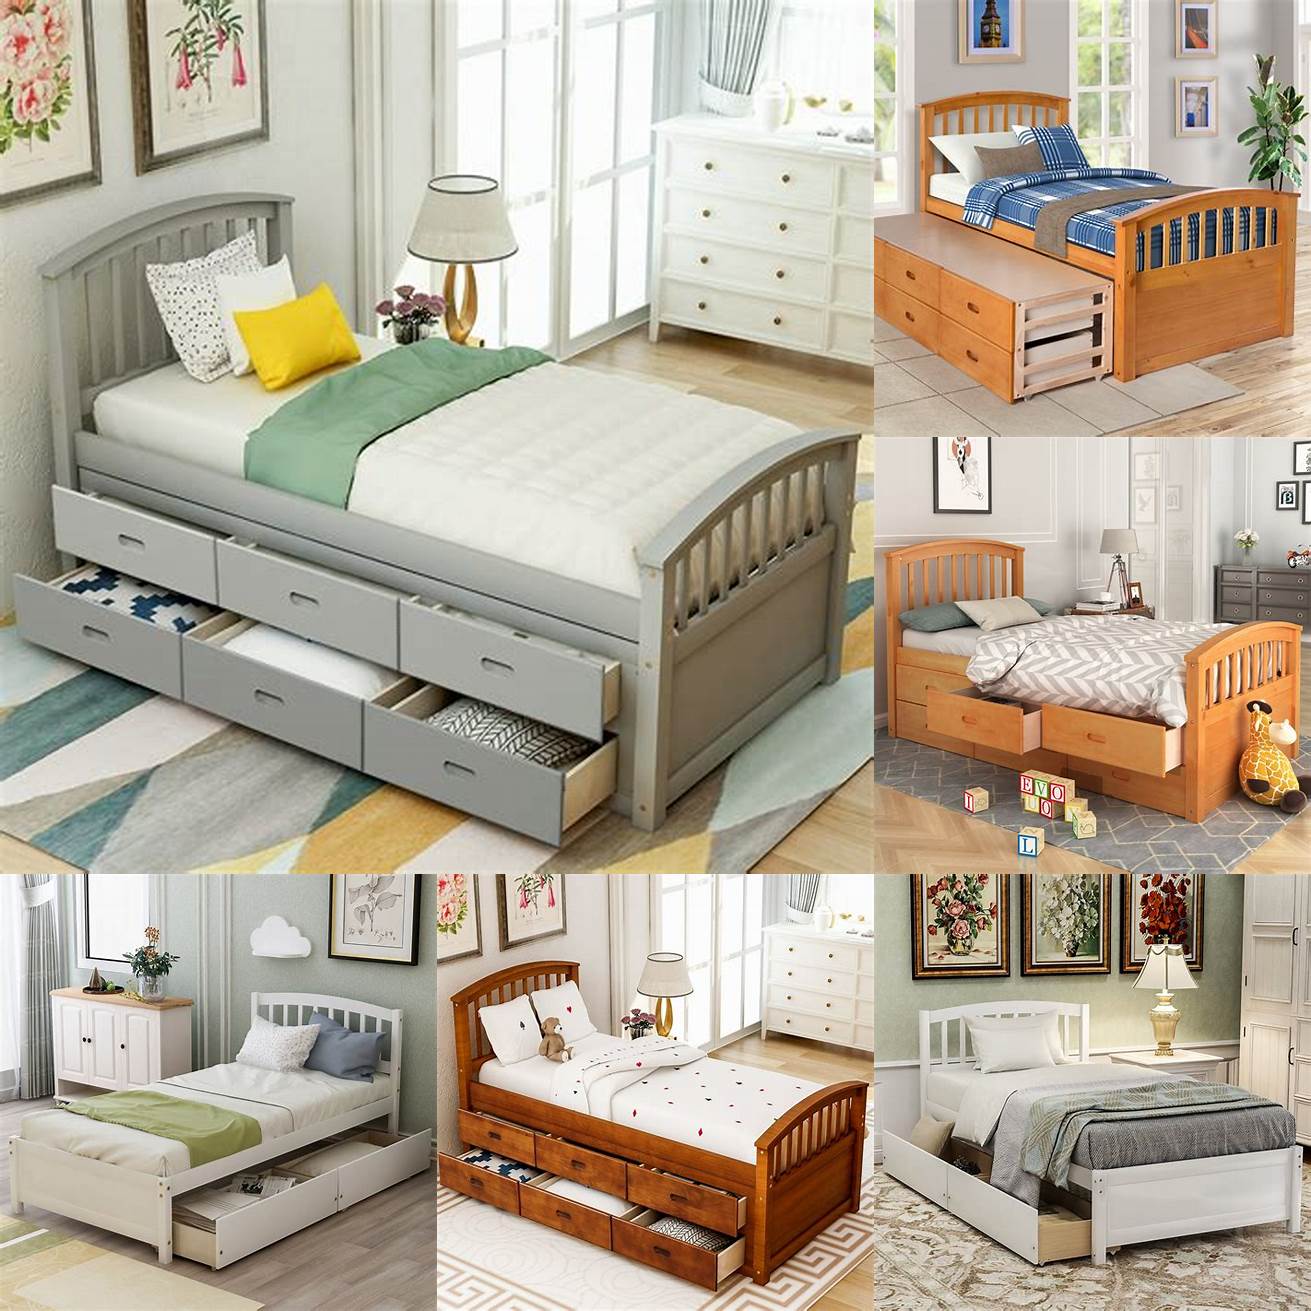 A Wood Twin Bed Frame with storage